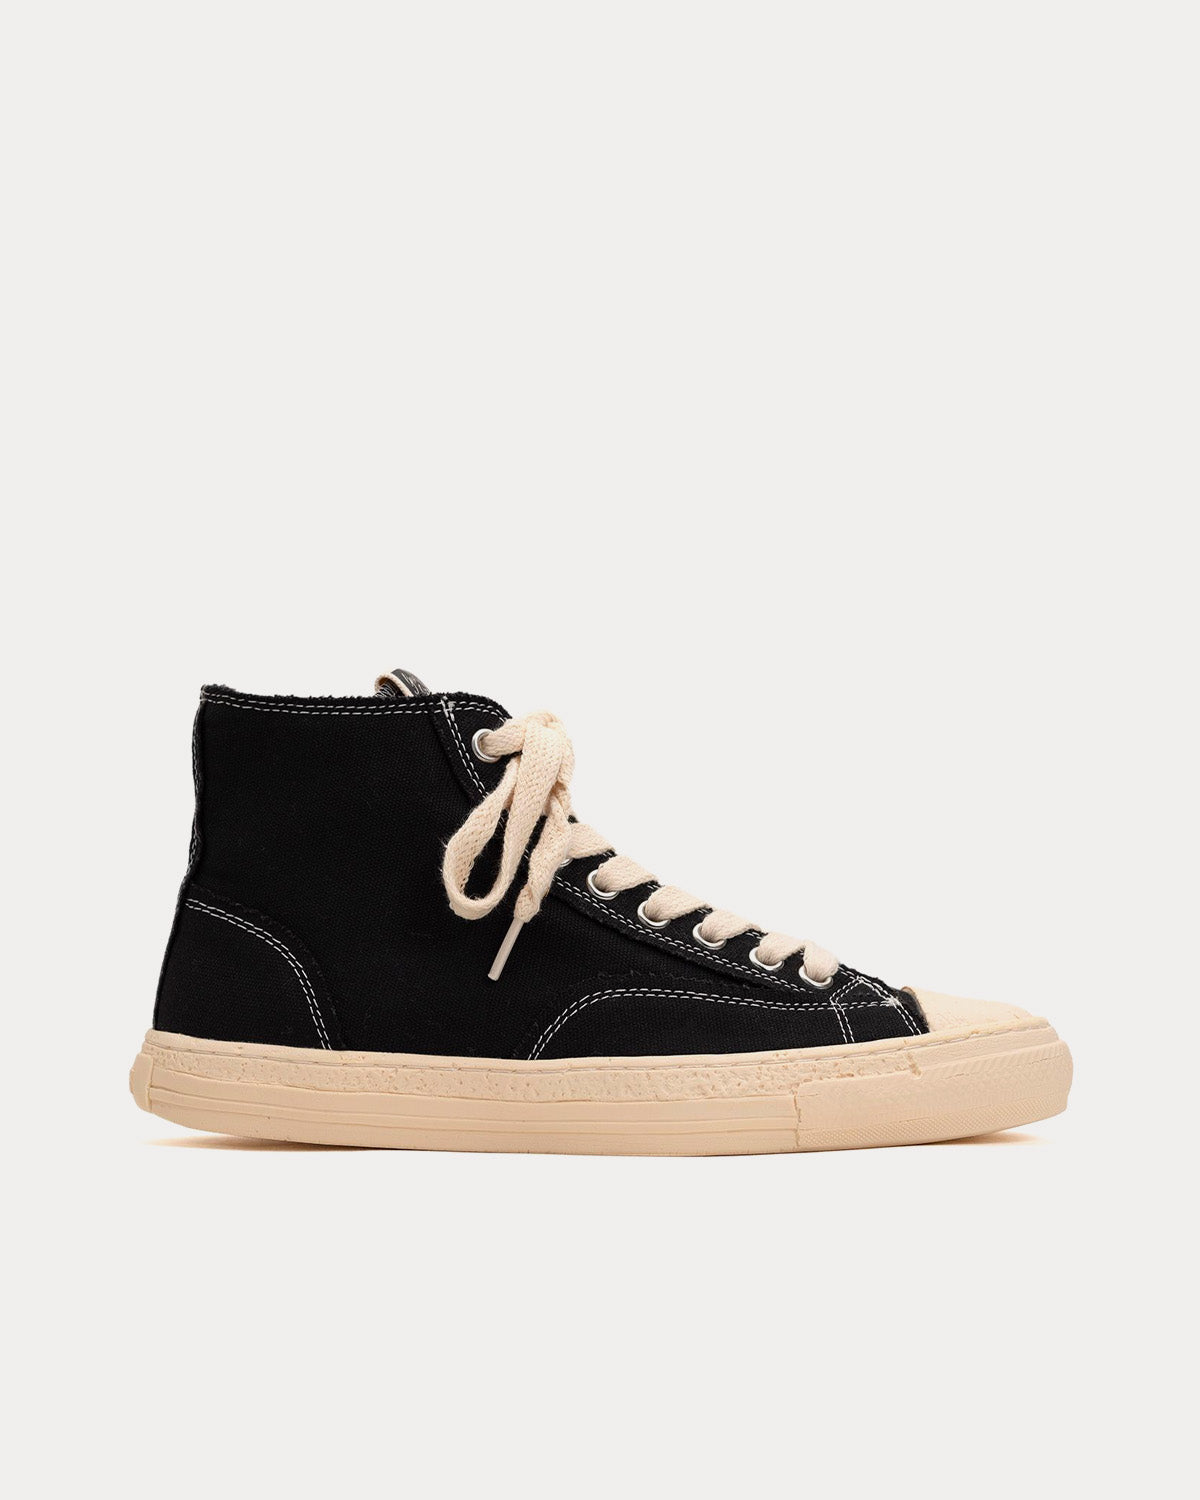 General Scale By Maison Mihara Yasuhiro - Past Sole Canvas Black High Top Sneakers